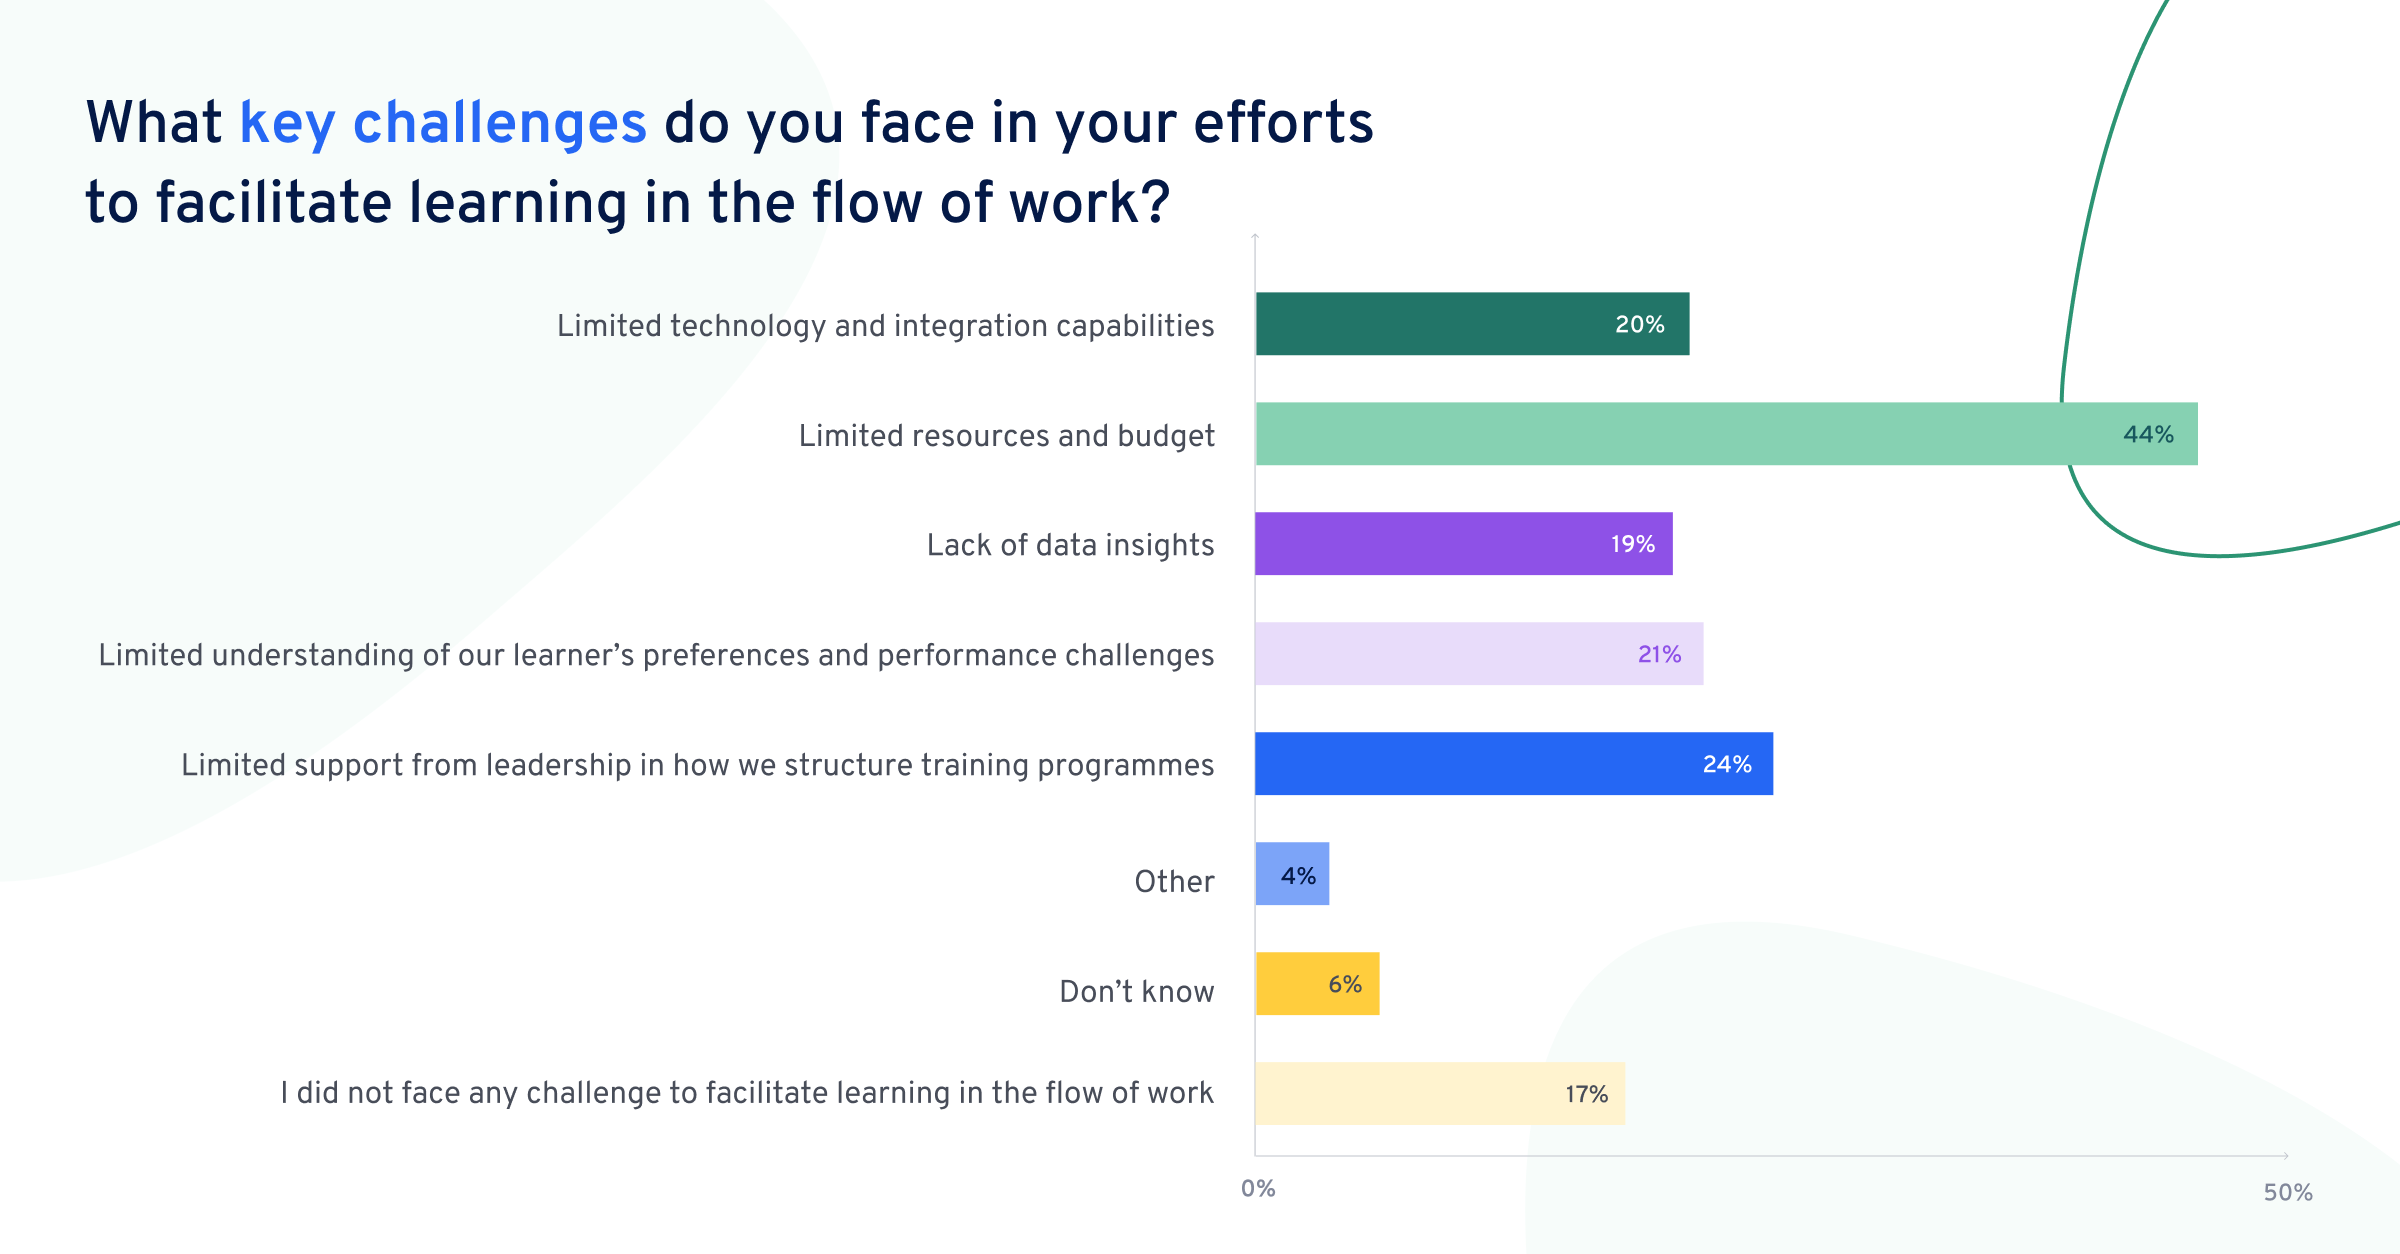 learning-in-the-flow-of-work-report-key-challenges-france